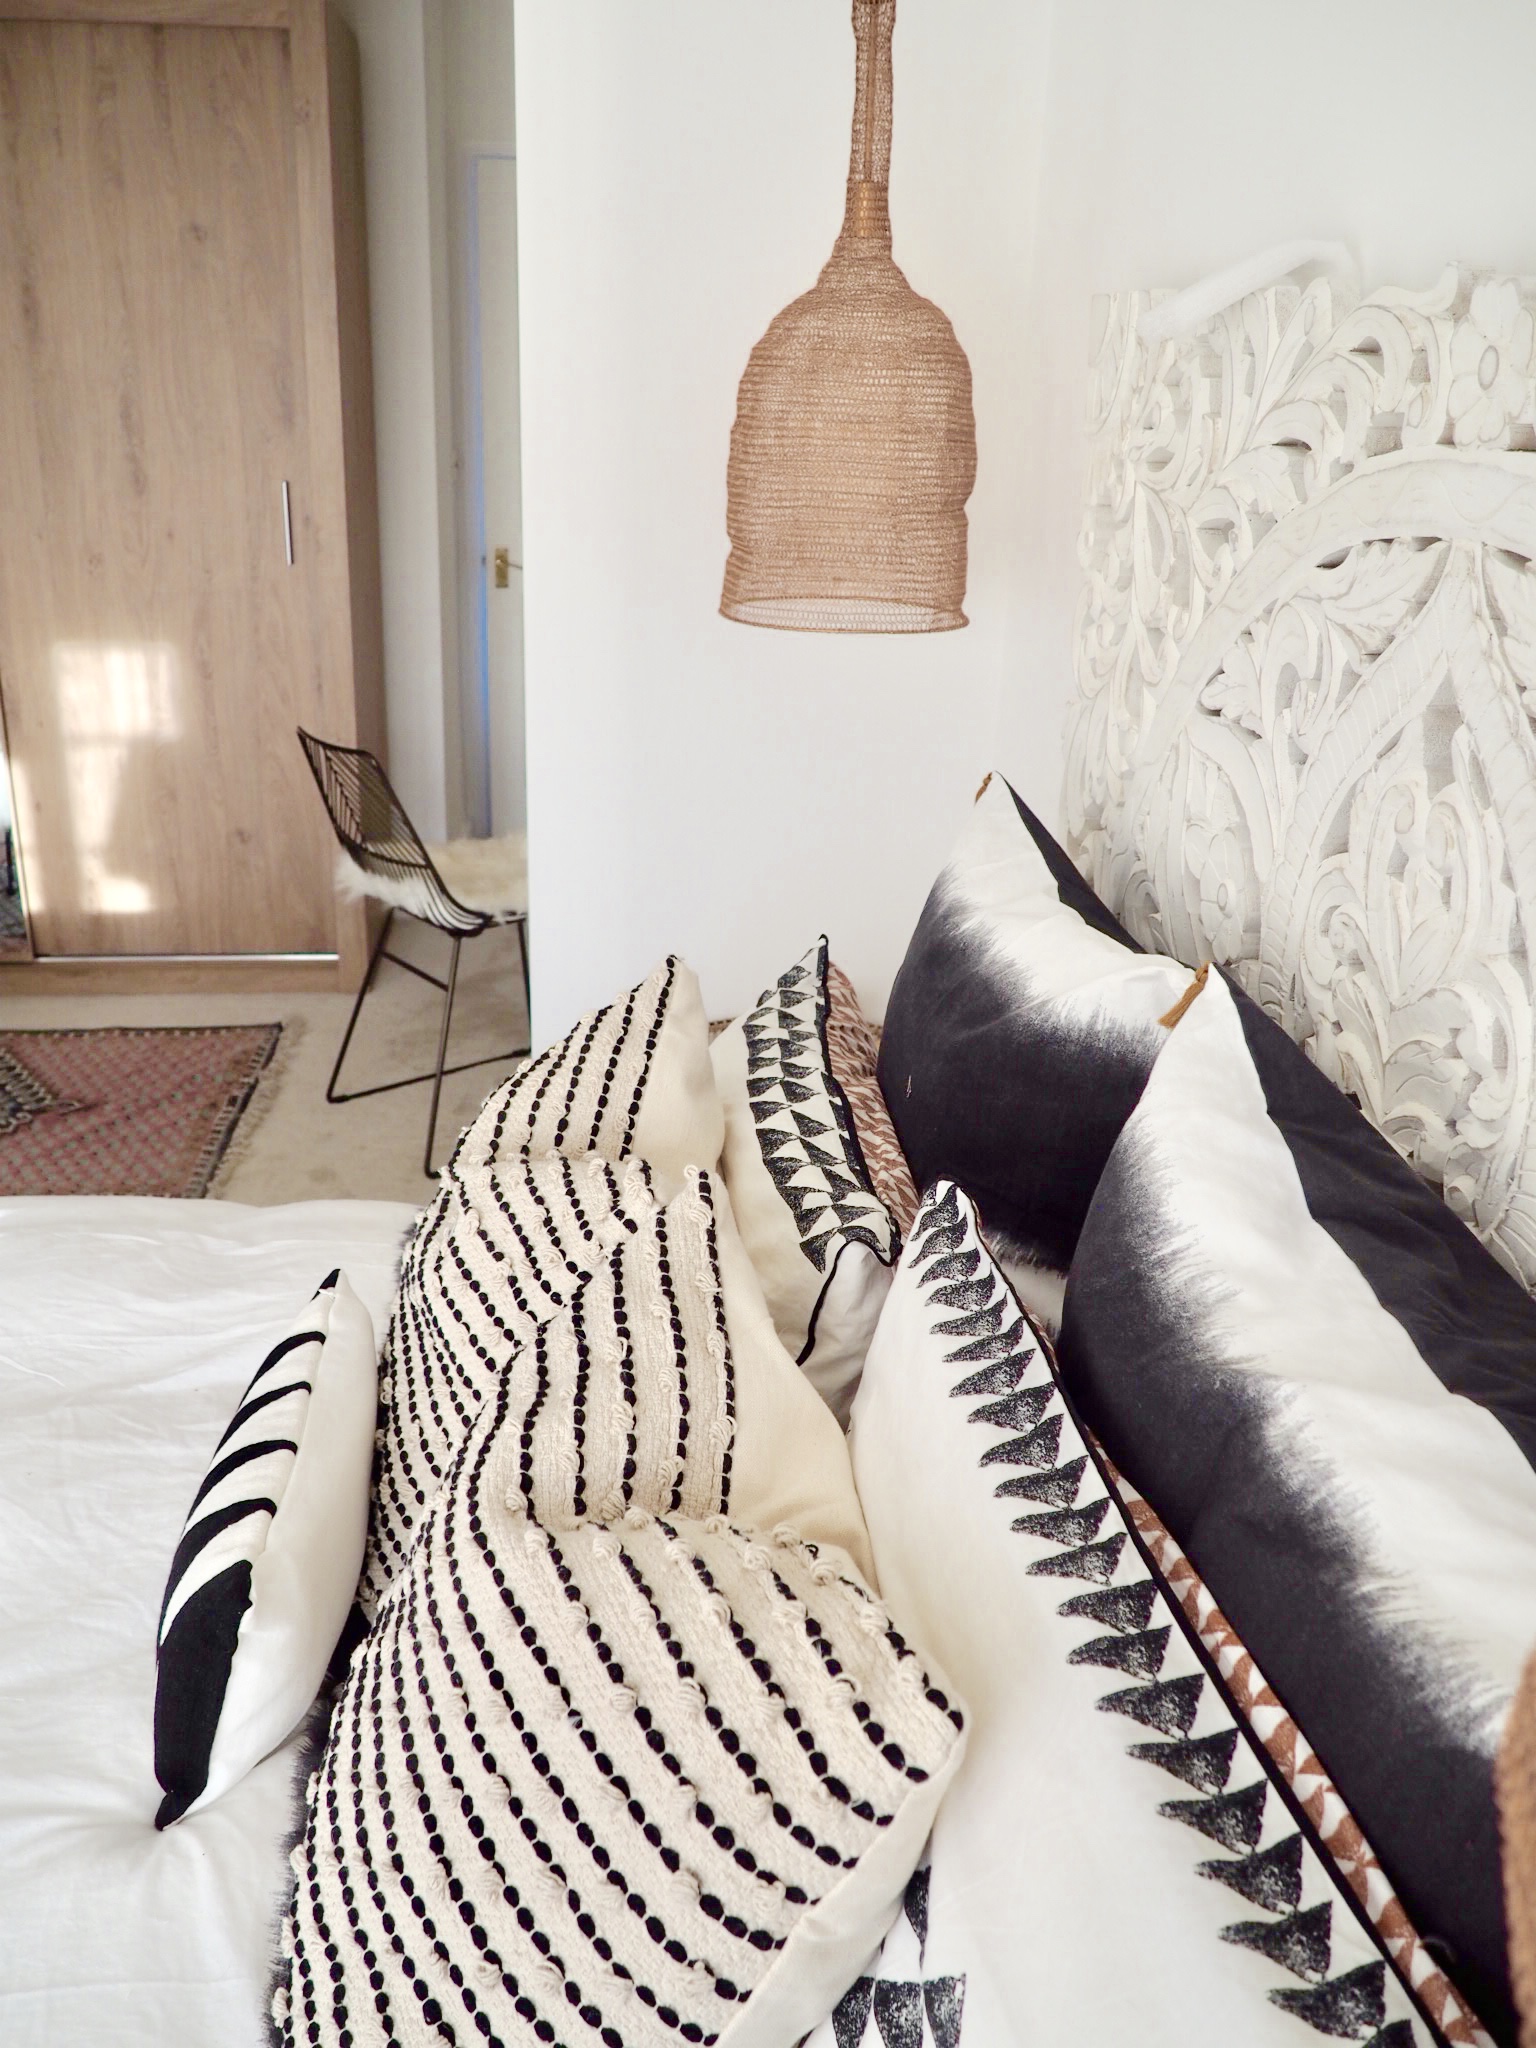 Bedding from La Redoute next to copper mesh pendant lights